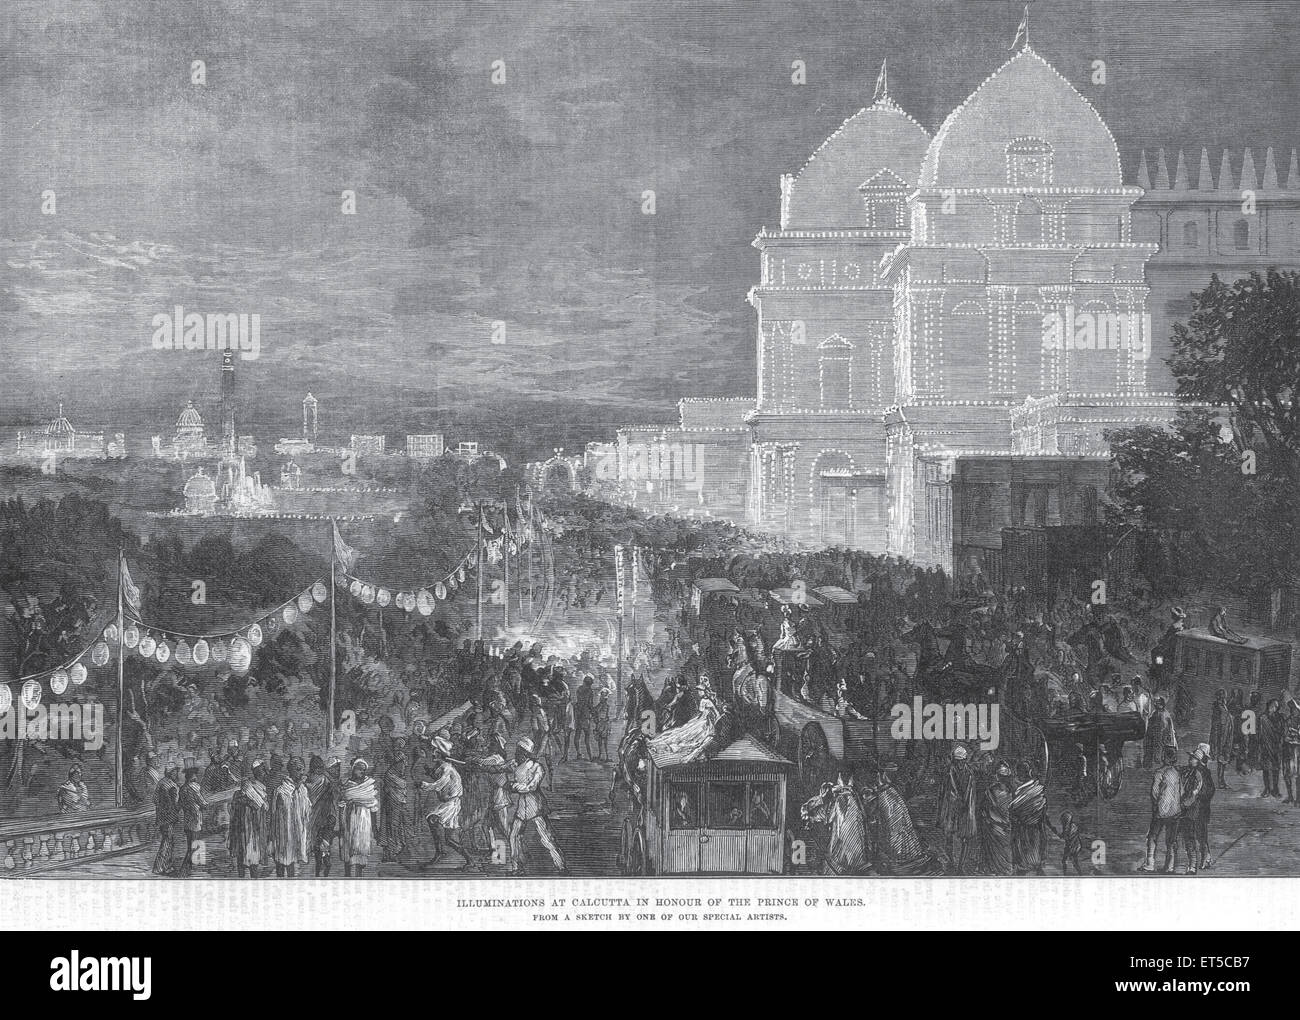 Illuminations at Calcutta in honor of the Prince of Wales ; Kolkata ; West Bengal ; India ; old vintage 1800s engraving Stock Photo